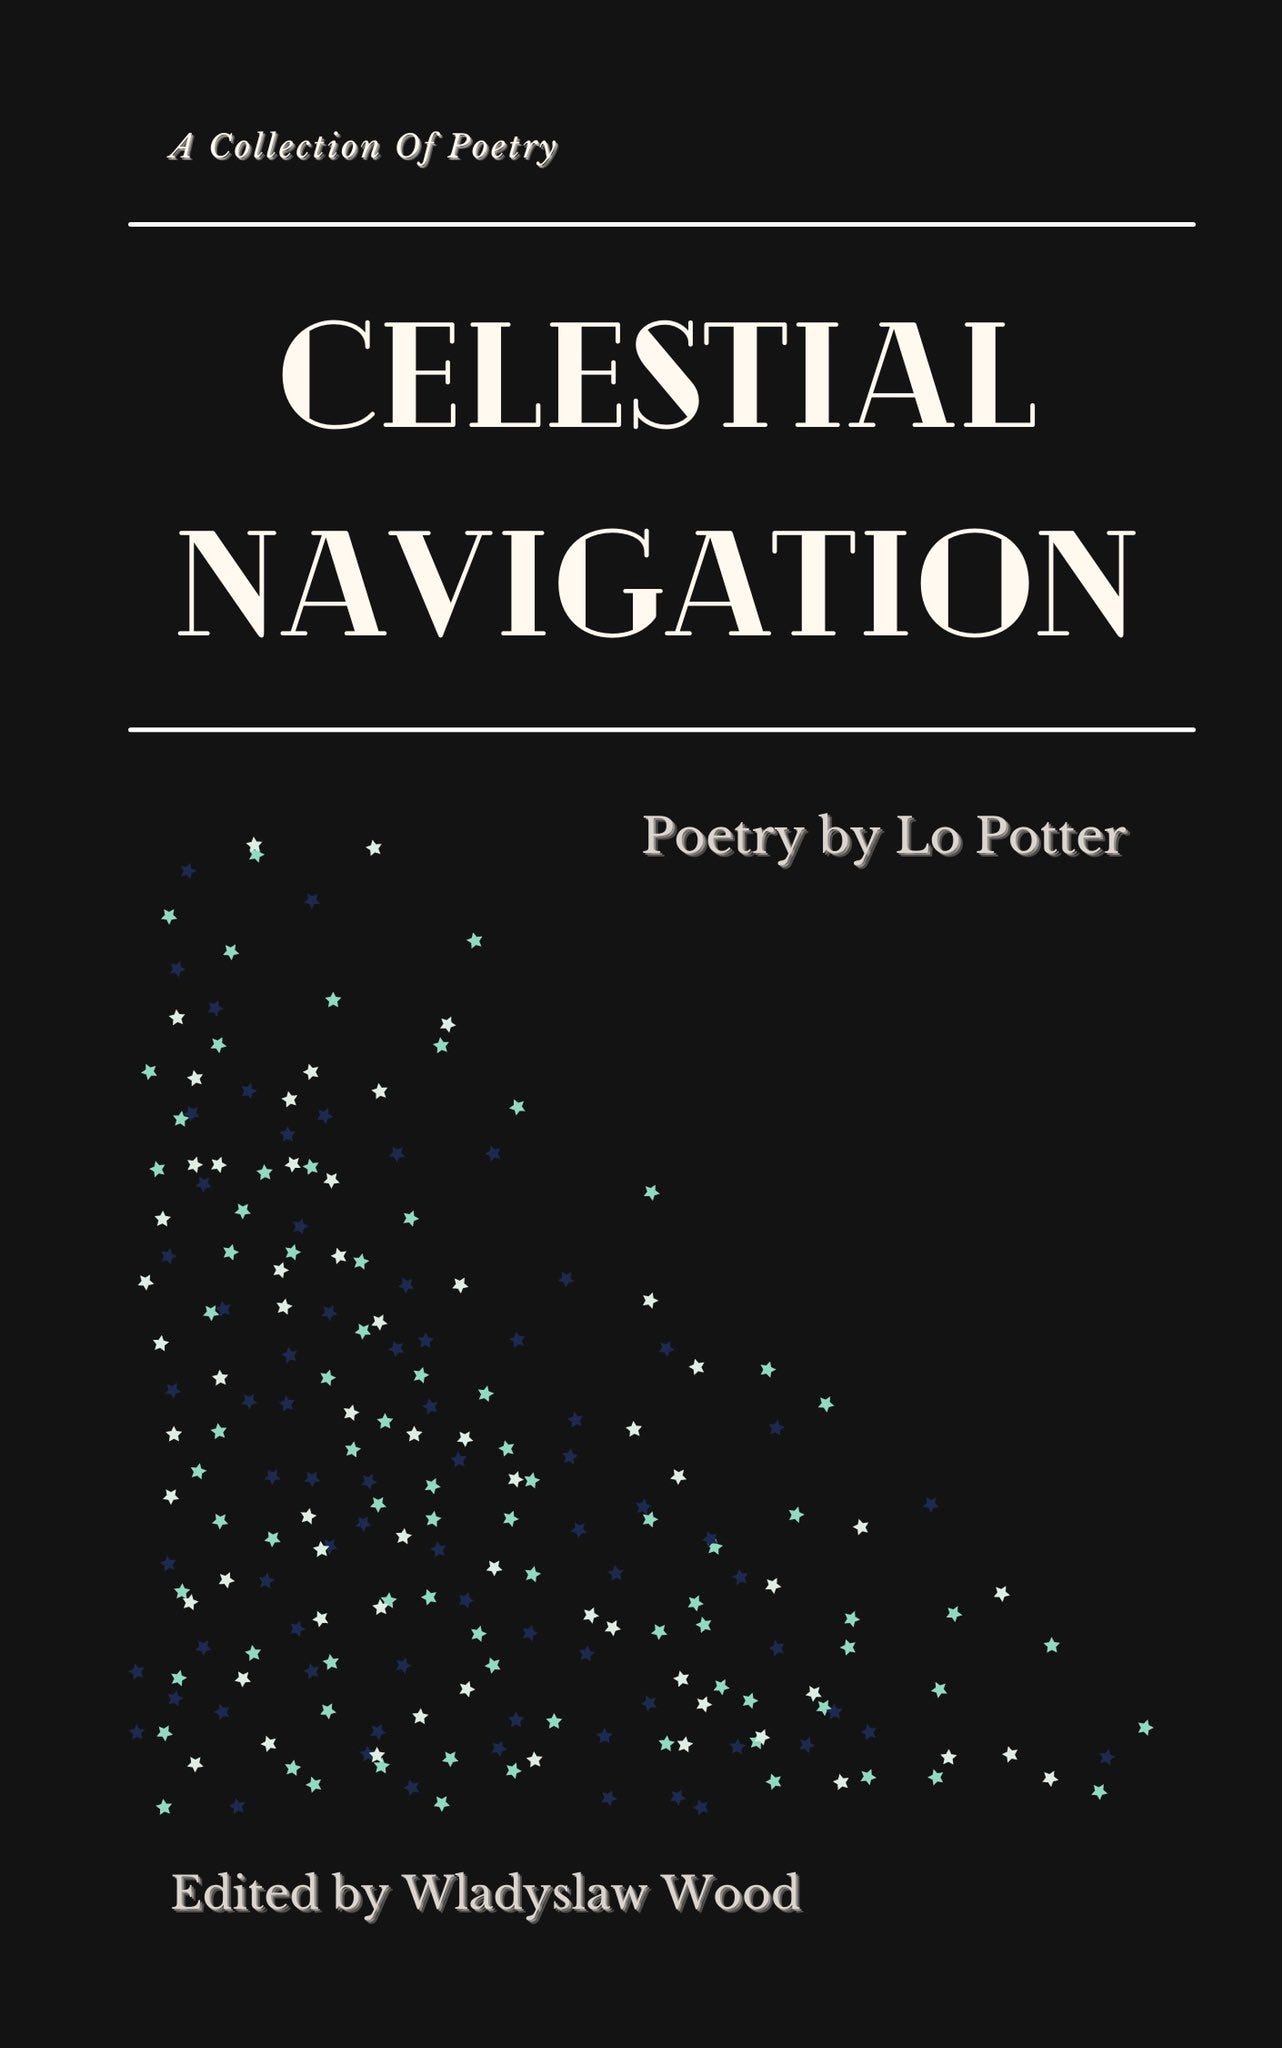 A front book cover mock up titled "Celestial Navigation" - plain cover with art deco font and scattered stars on cover